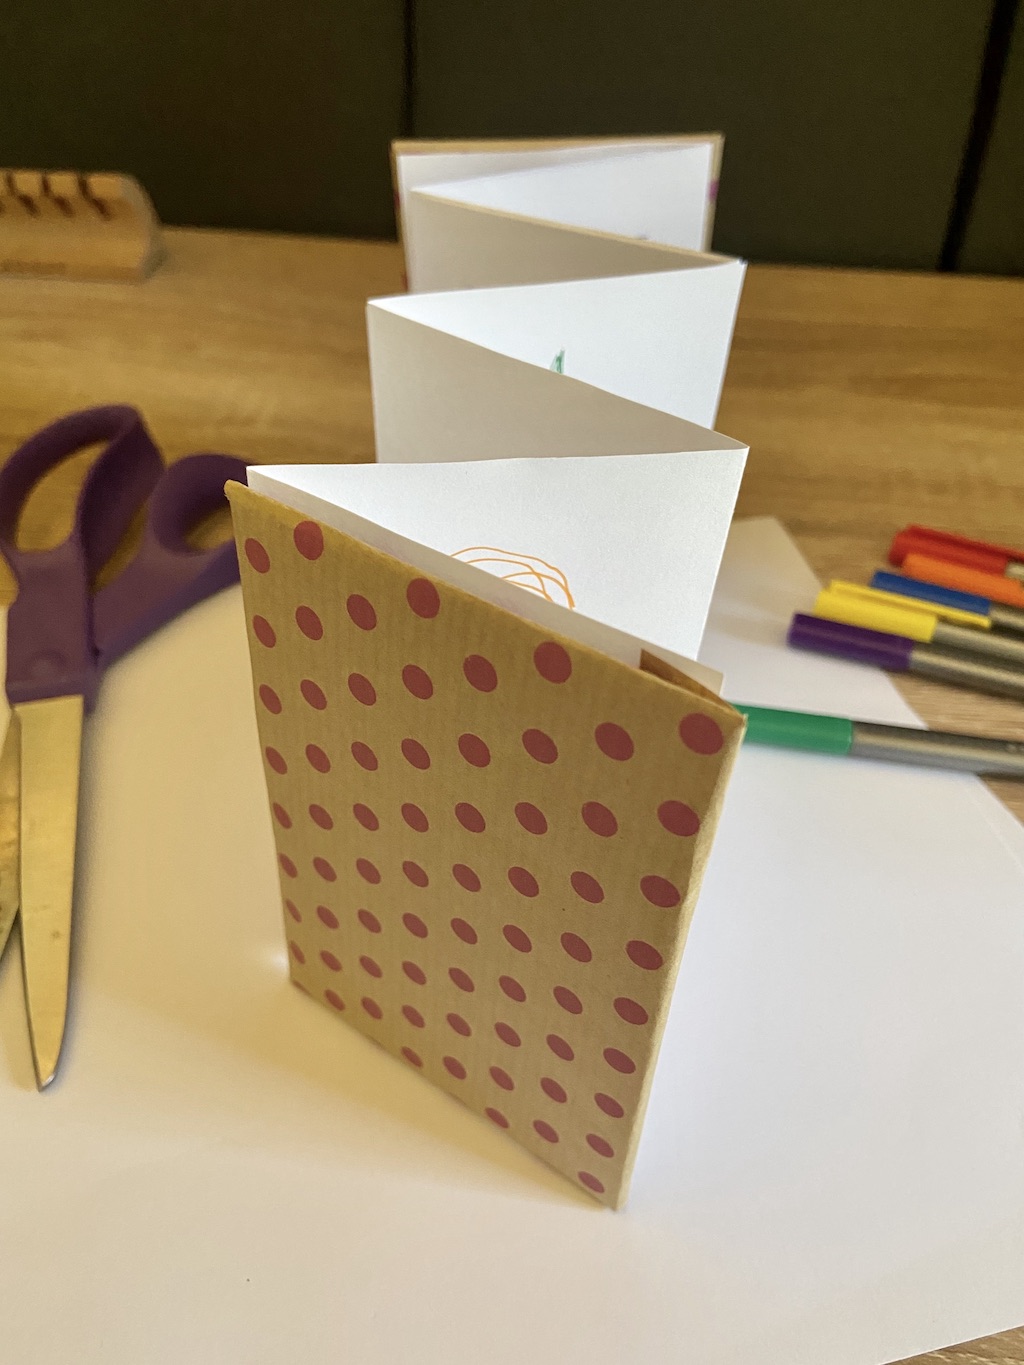 An example of an accordion book